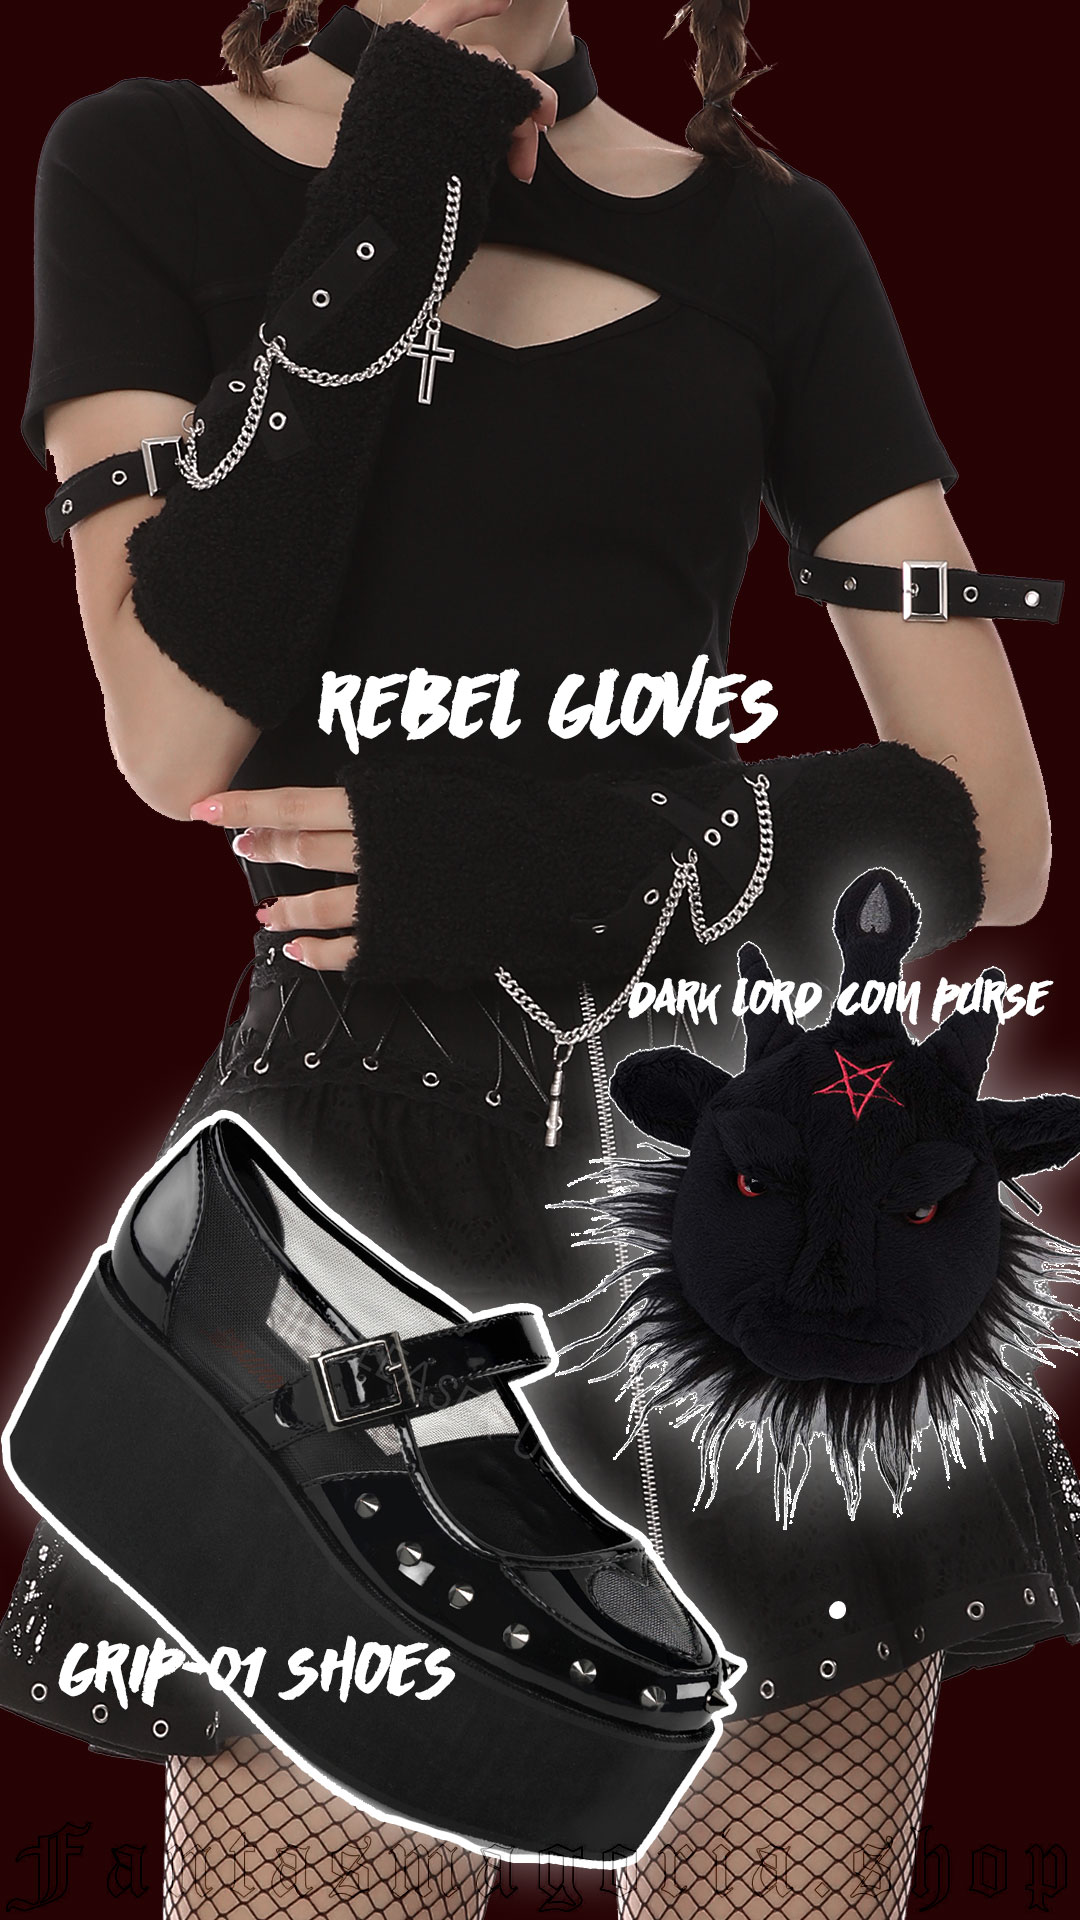 girly rebel gloves styled with platform shoes